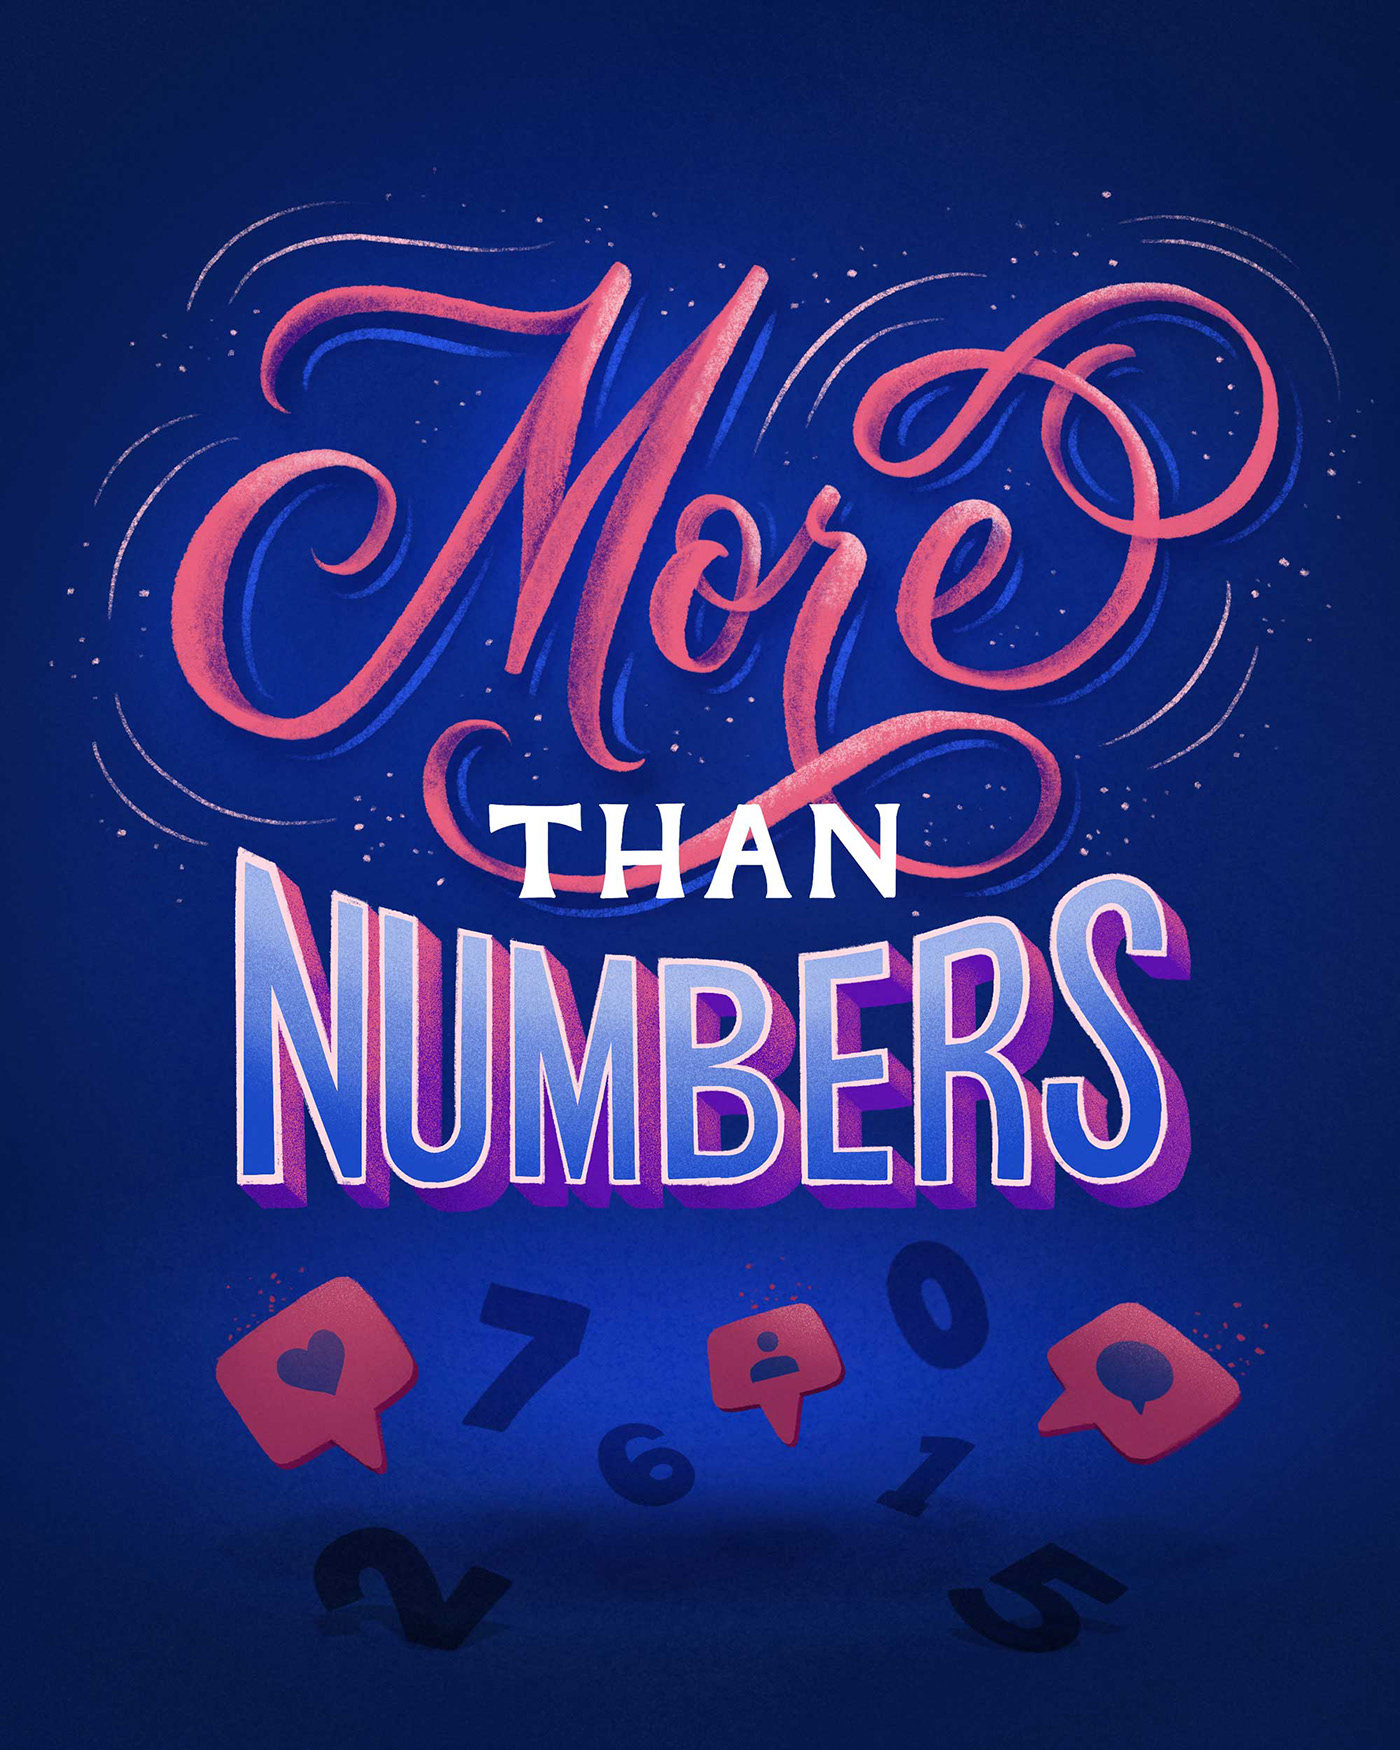 Hand lettering featuring the phrase "more than numbers" with Instagram icons